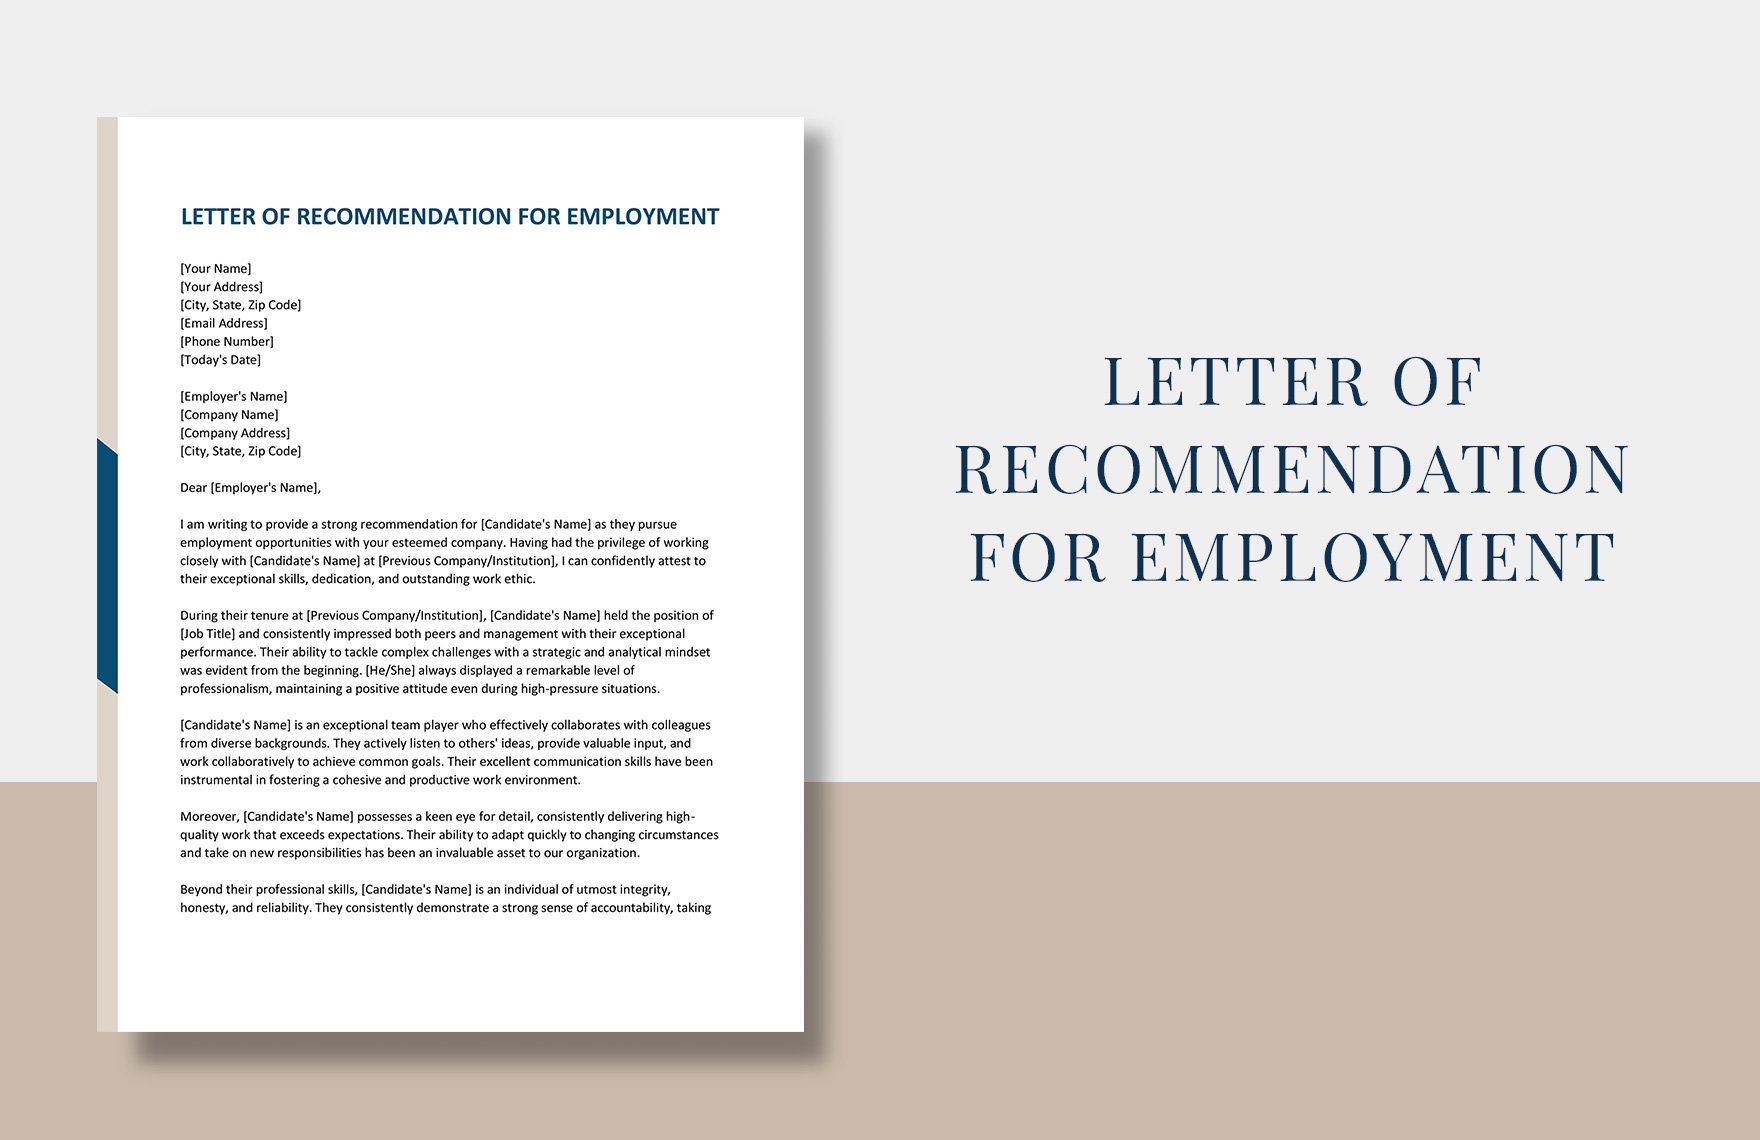 Letter of Recommendation for Employment